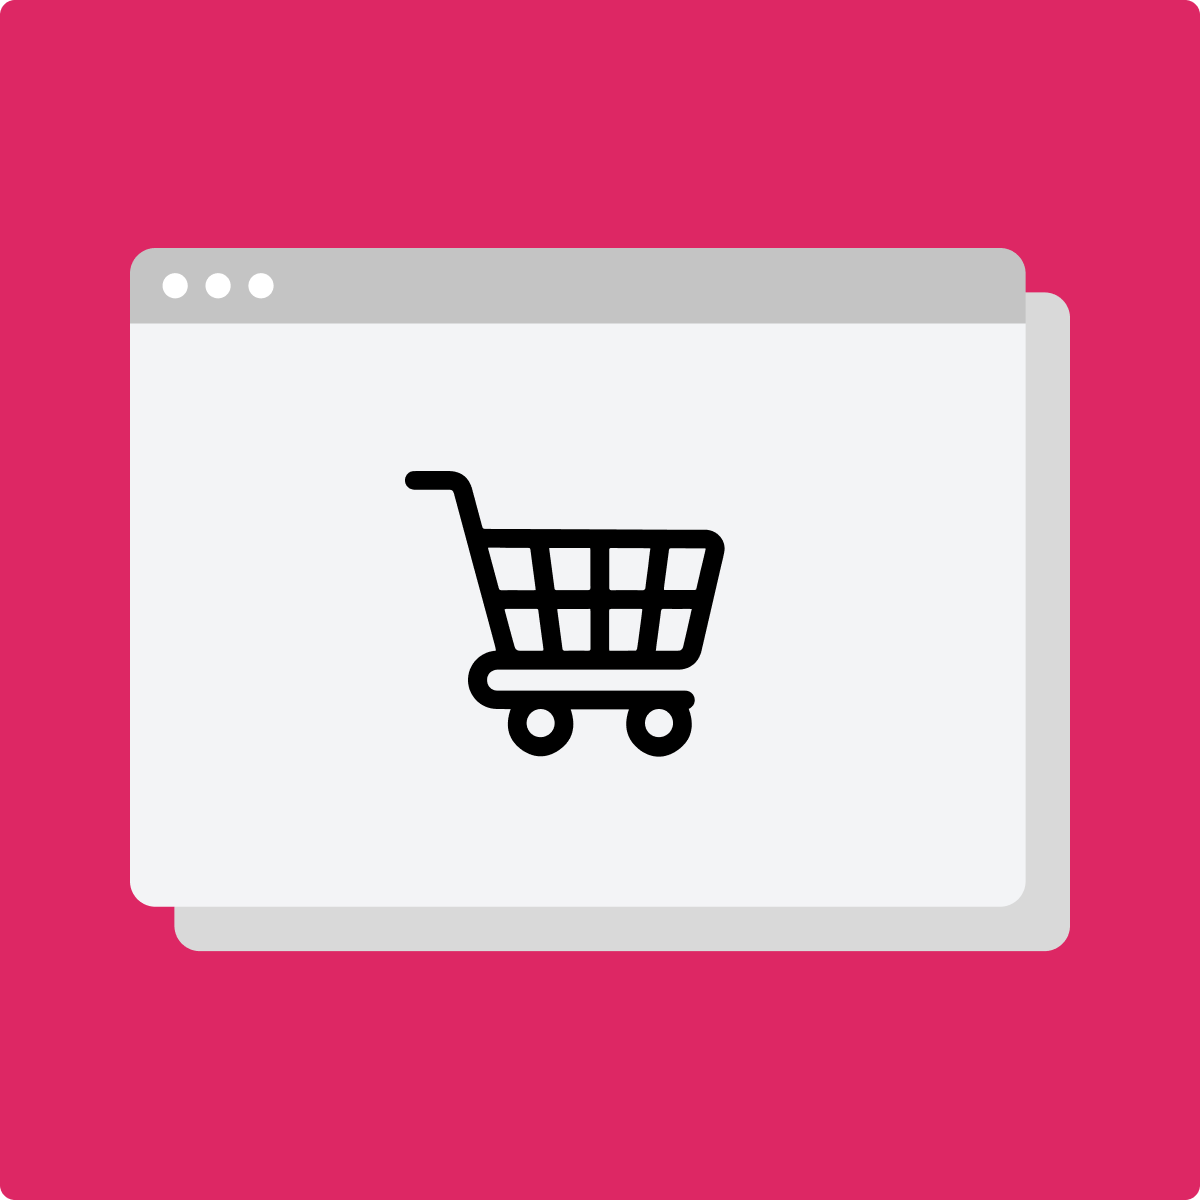 A picture of an online shopping cart on a grey digital screen over a pink background